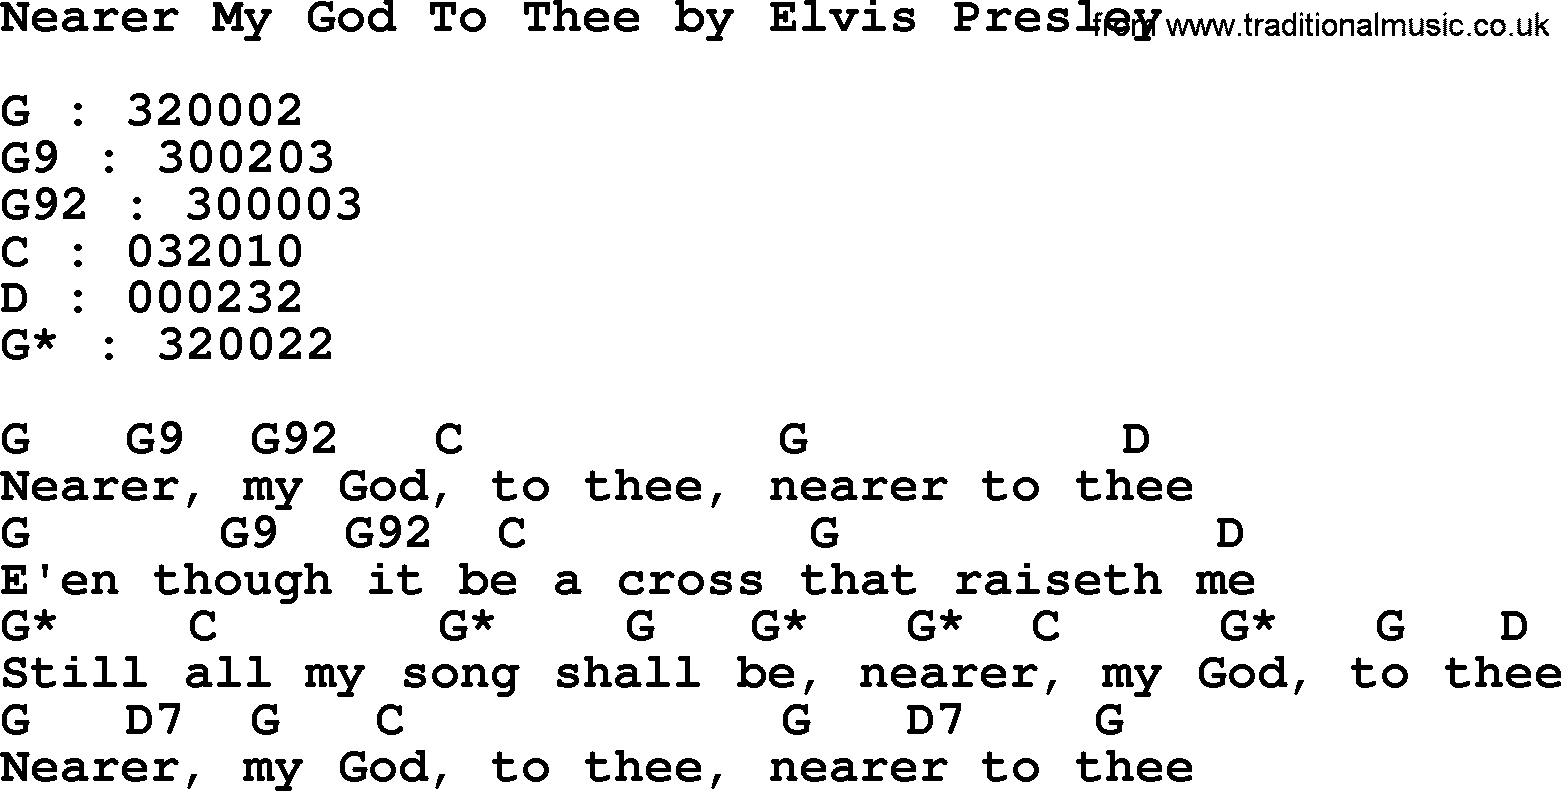 Elvis Presley song: Nearer My God To Thee, lyrics and chords